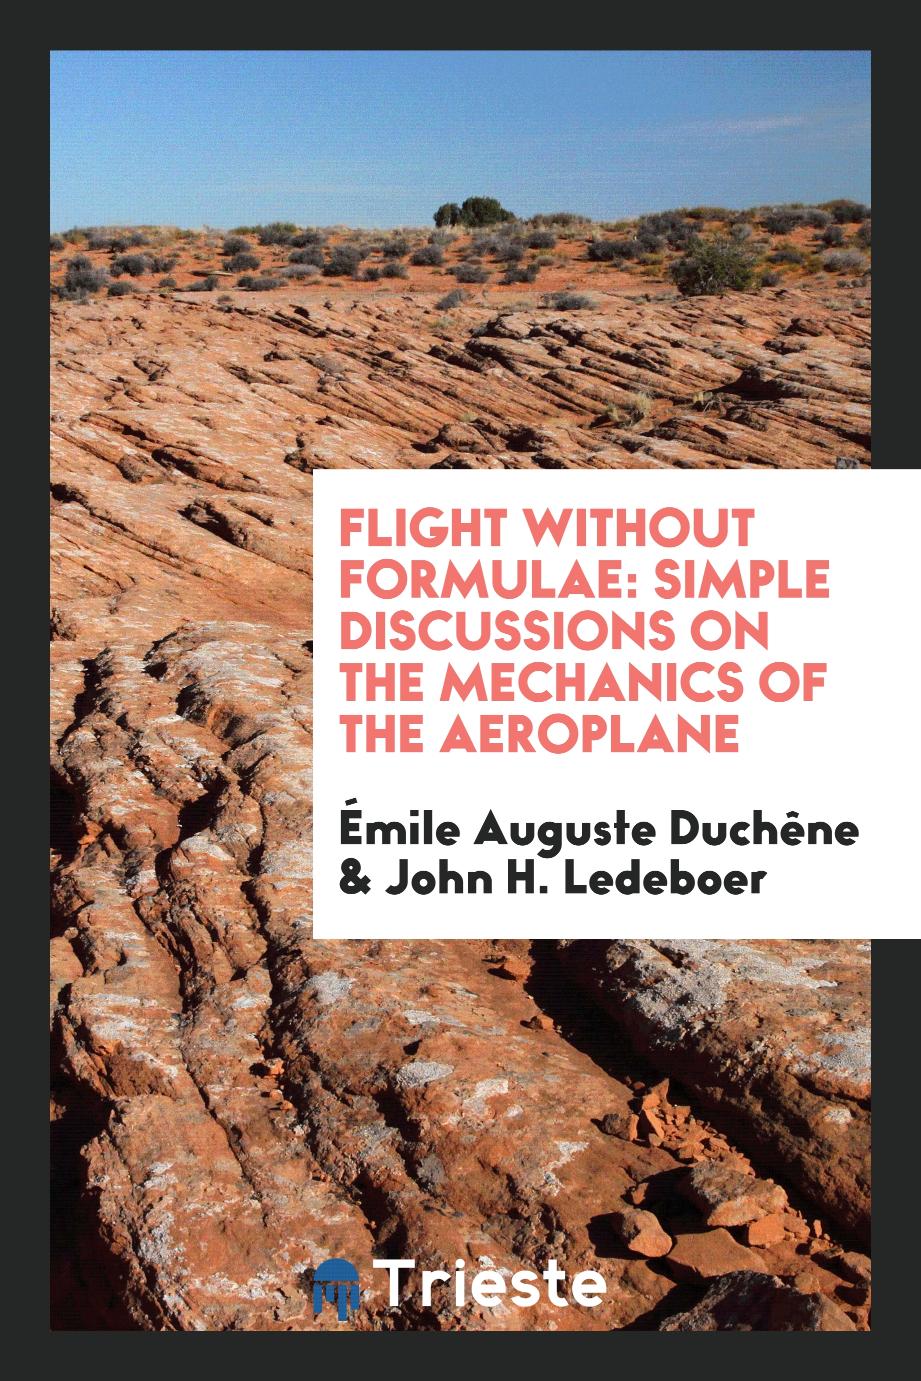 Flight Without Formulae: Simple Discussions on the Mechanics of the Aeroplane